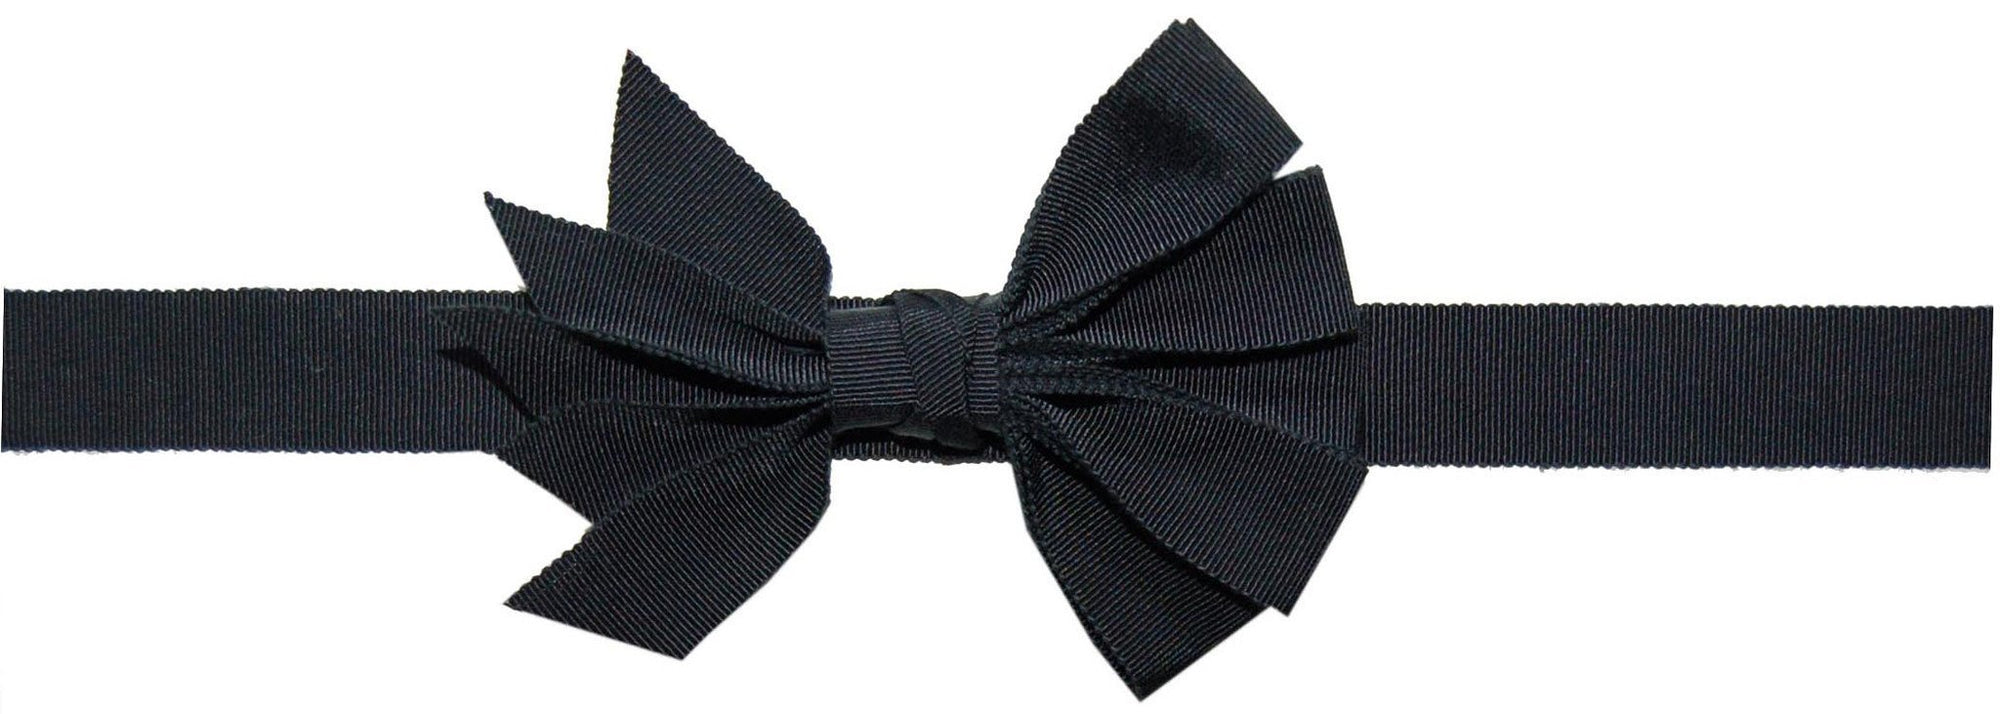 Hat Band Style 42 with Bow in Black Grosgrain | Handmade in Seattle WA | Pandemonium Millinery